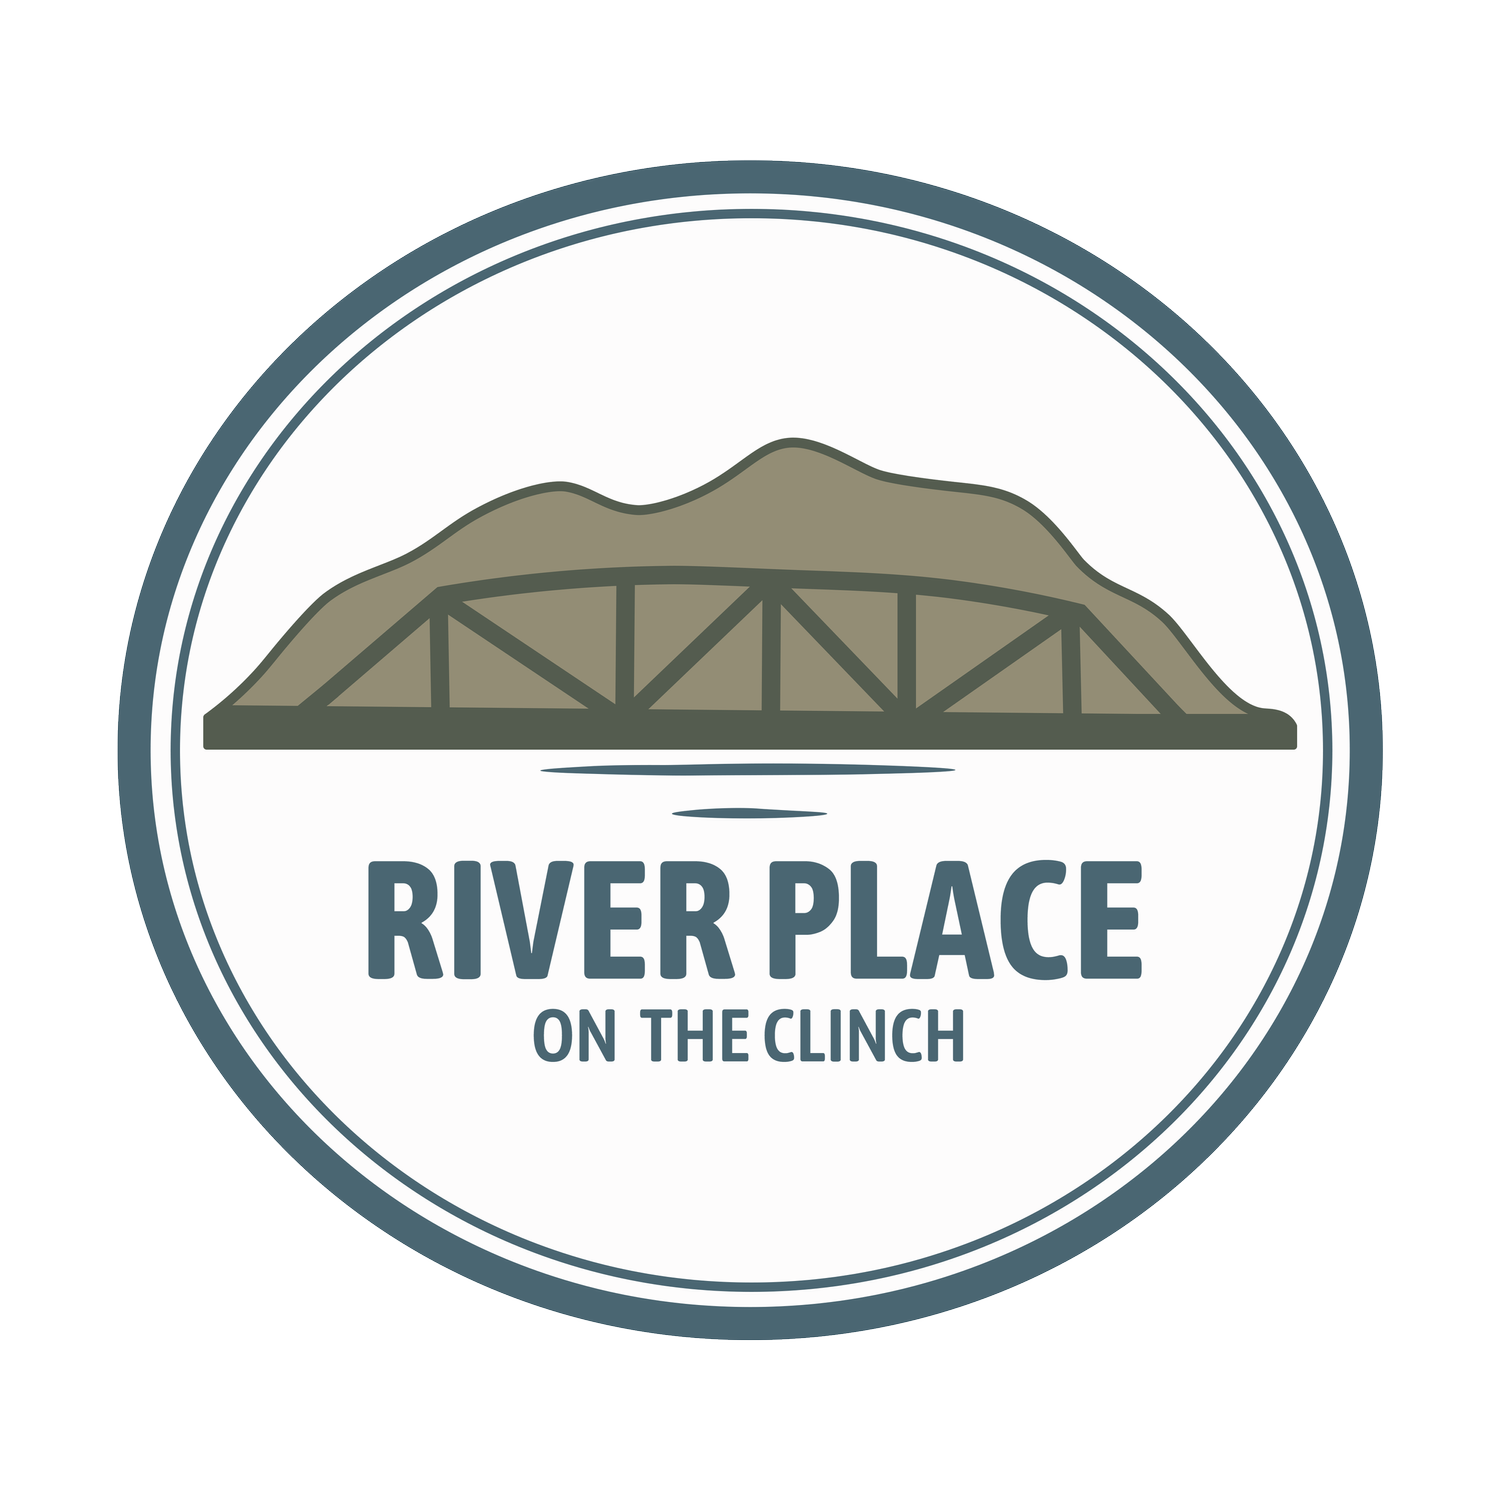 River Place on the Clinch